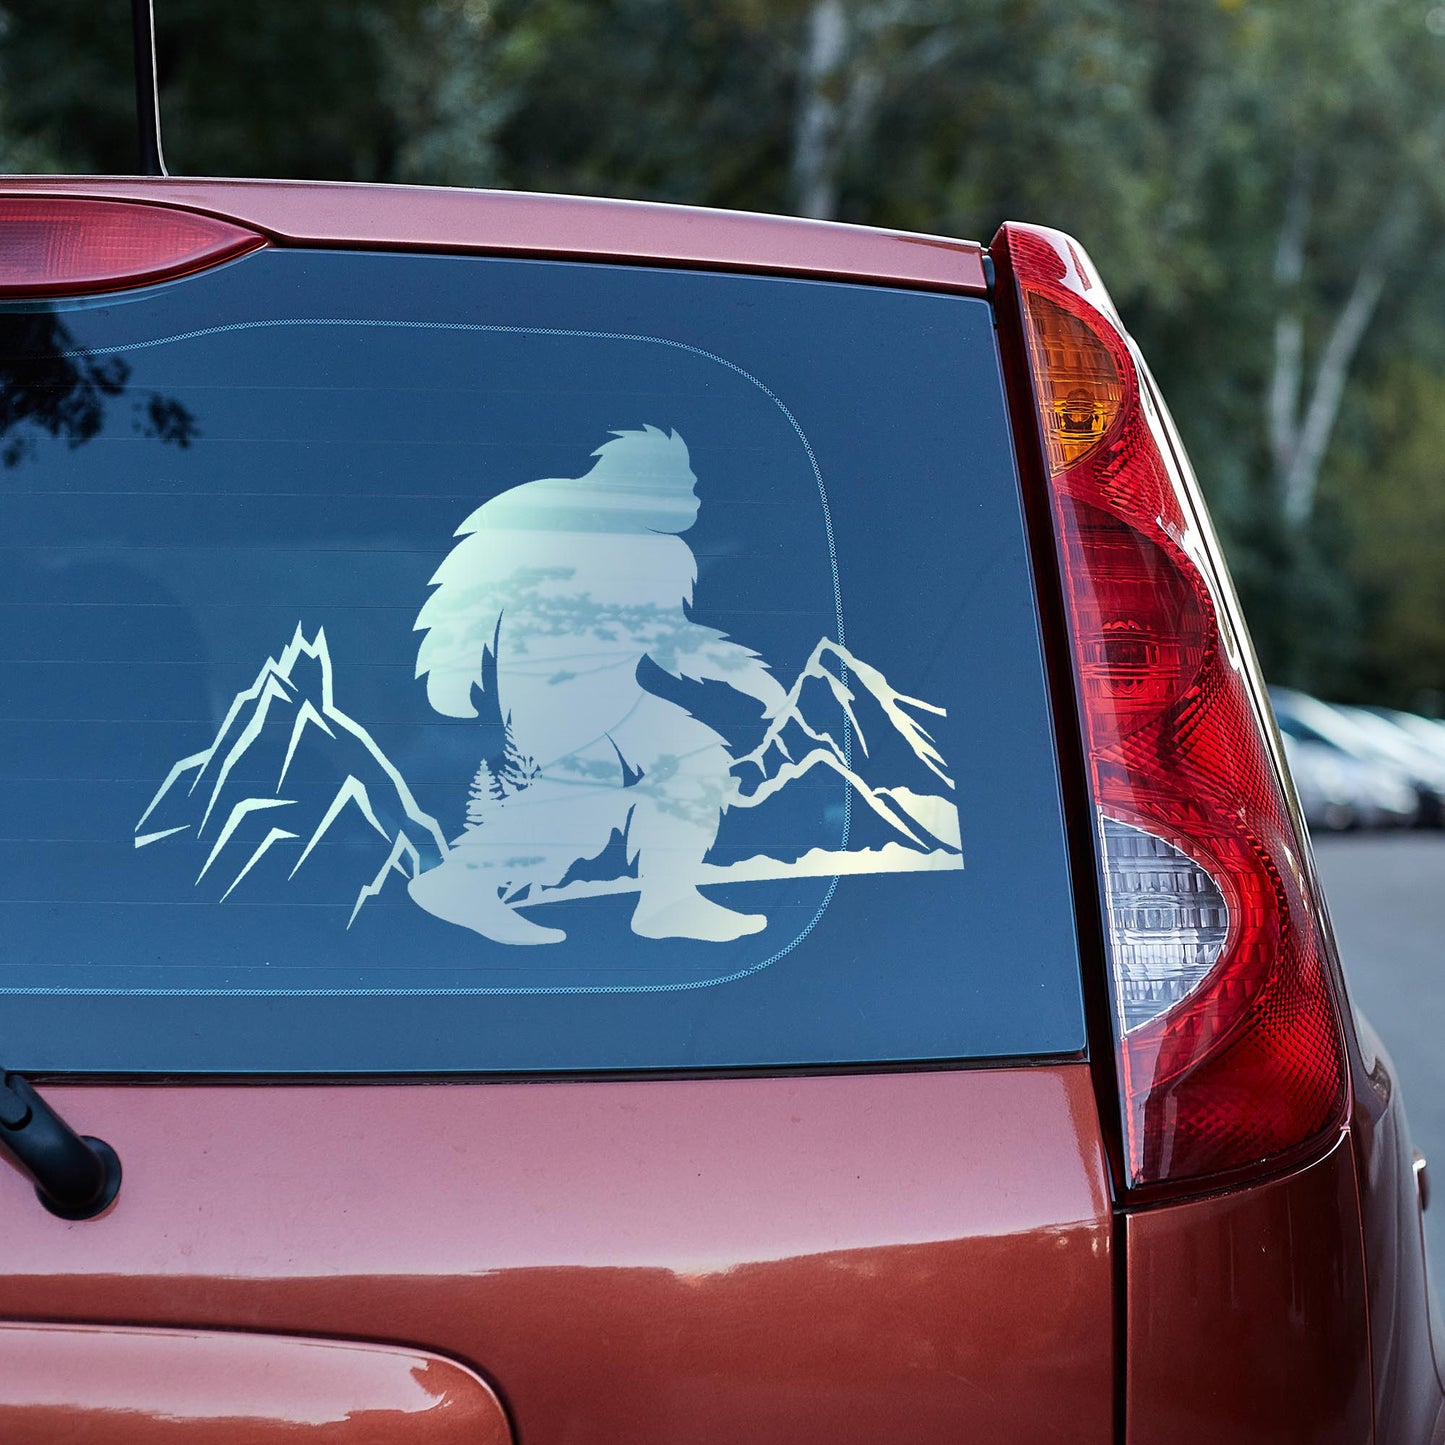 Bigfoot Vinyl decal decal stickers Decals for cars Decals for Trucks decals for tumblers minivan sticker SUV decals truck decals window decal car Window decals window decor